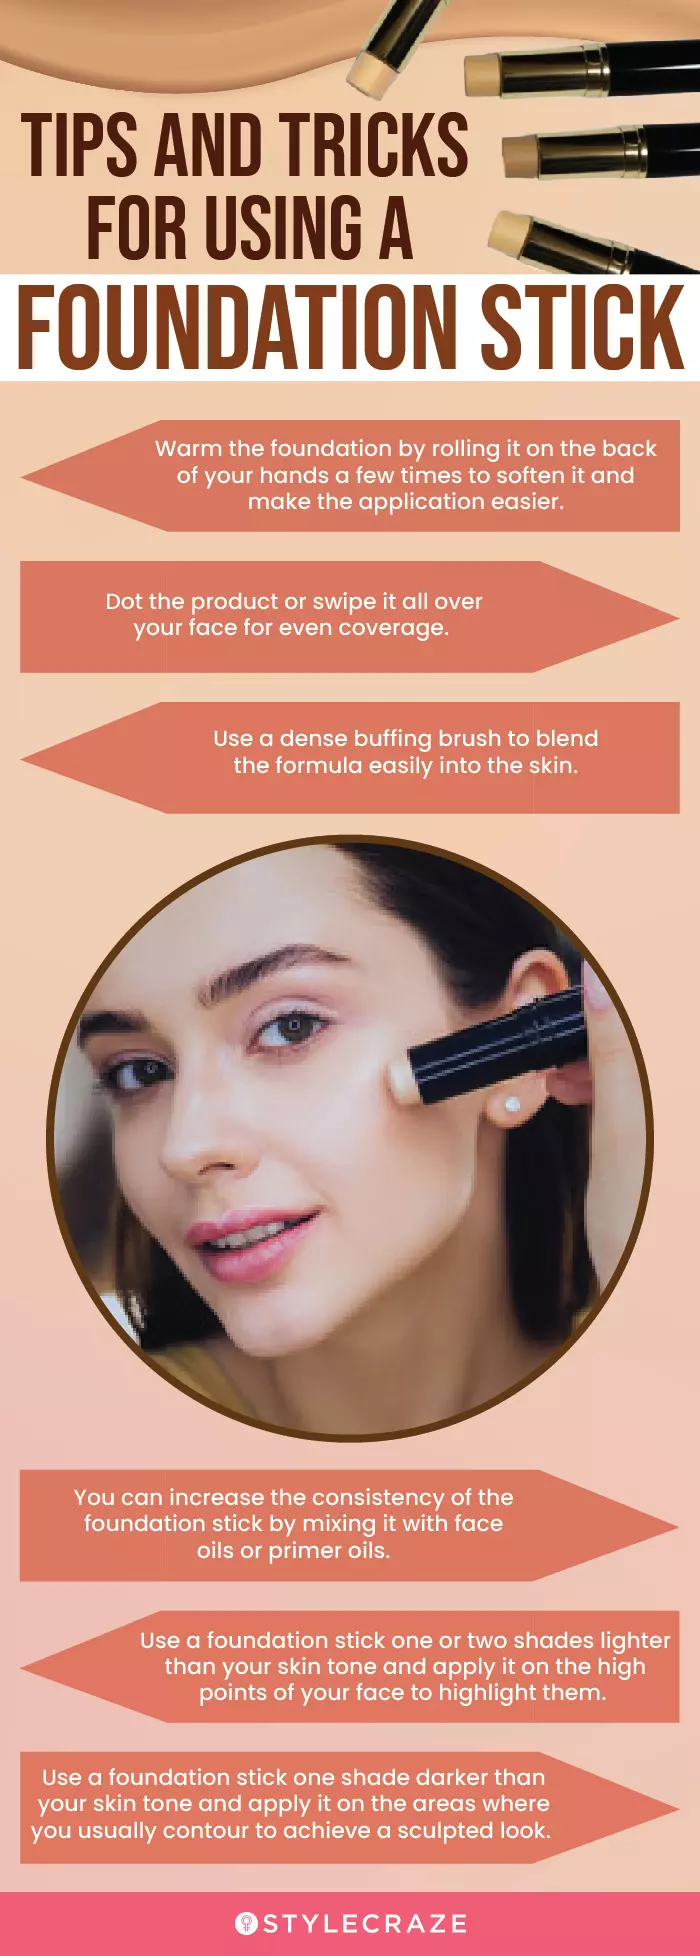 Tips And Tricks For Using A Foundation Stick (infographic)